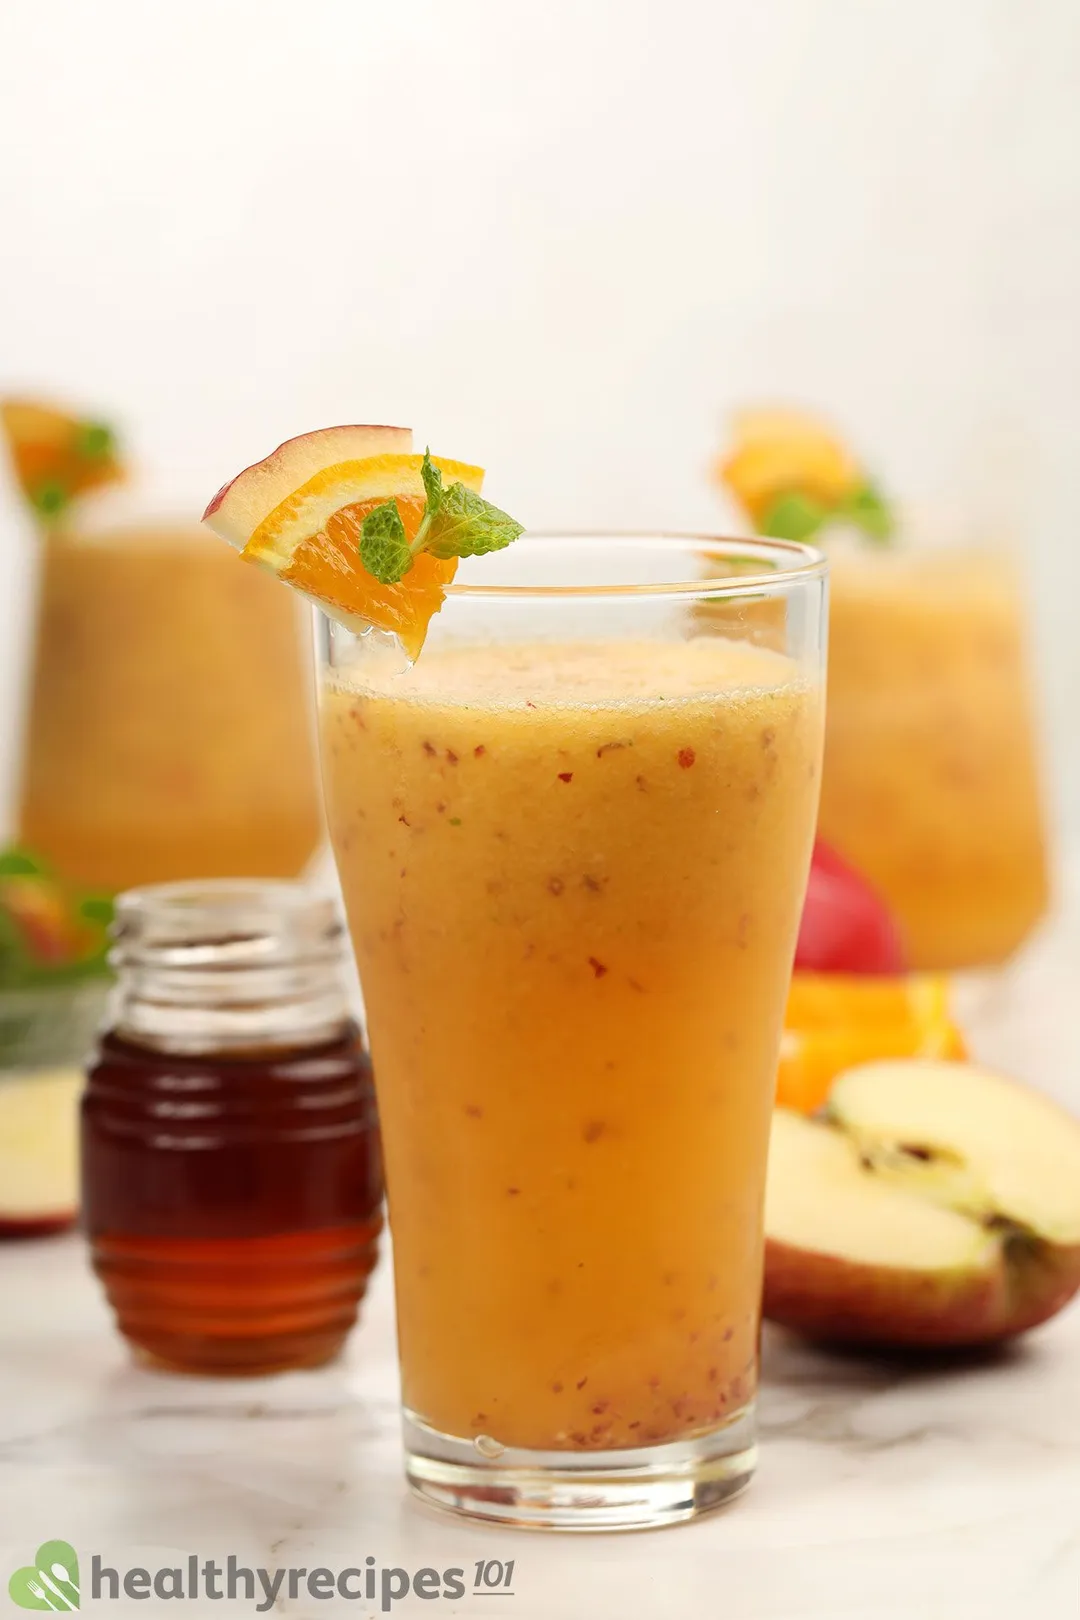 A glass of apple orange smoothie laid near a small jar of honey and half an apple with two other similar glasses in the blurred background.